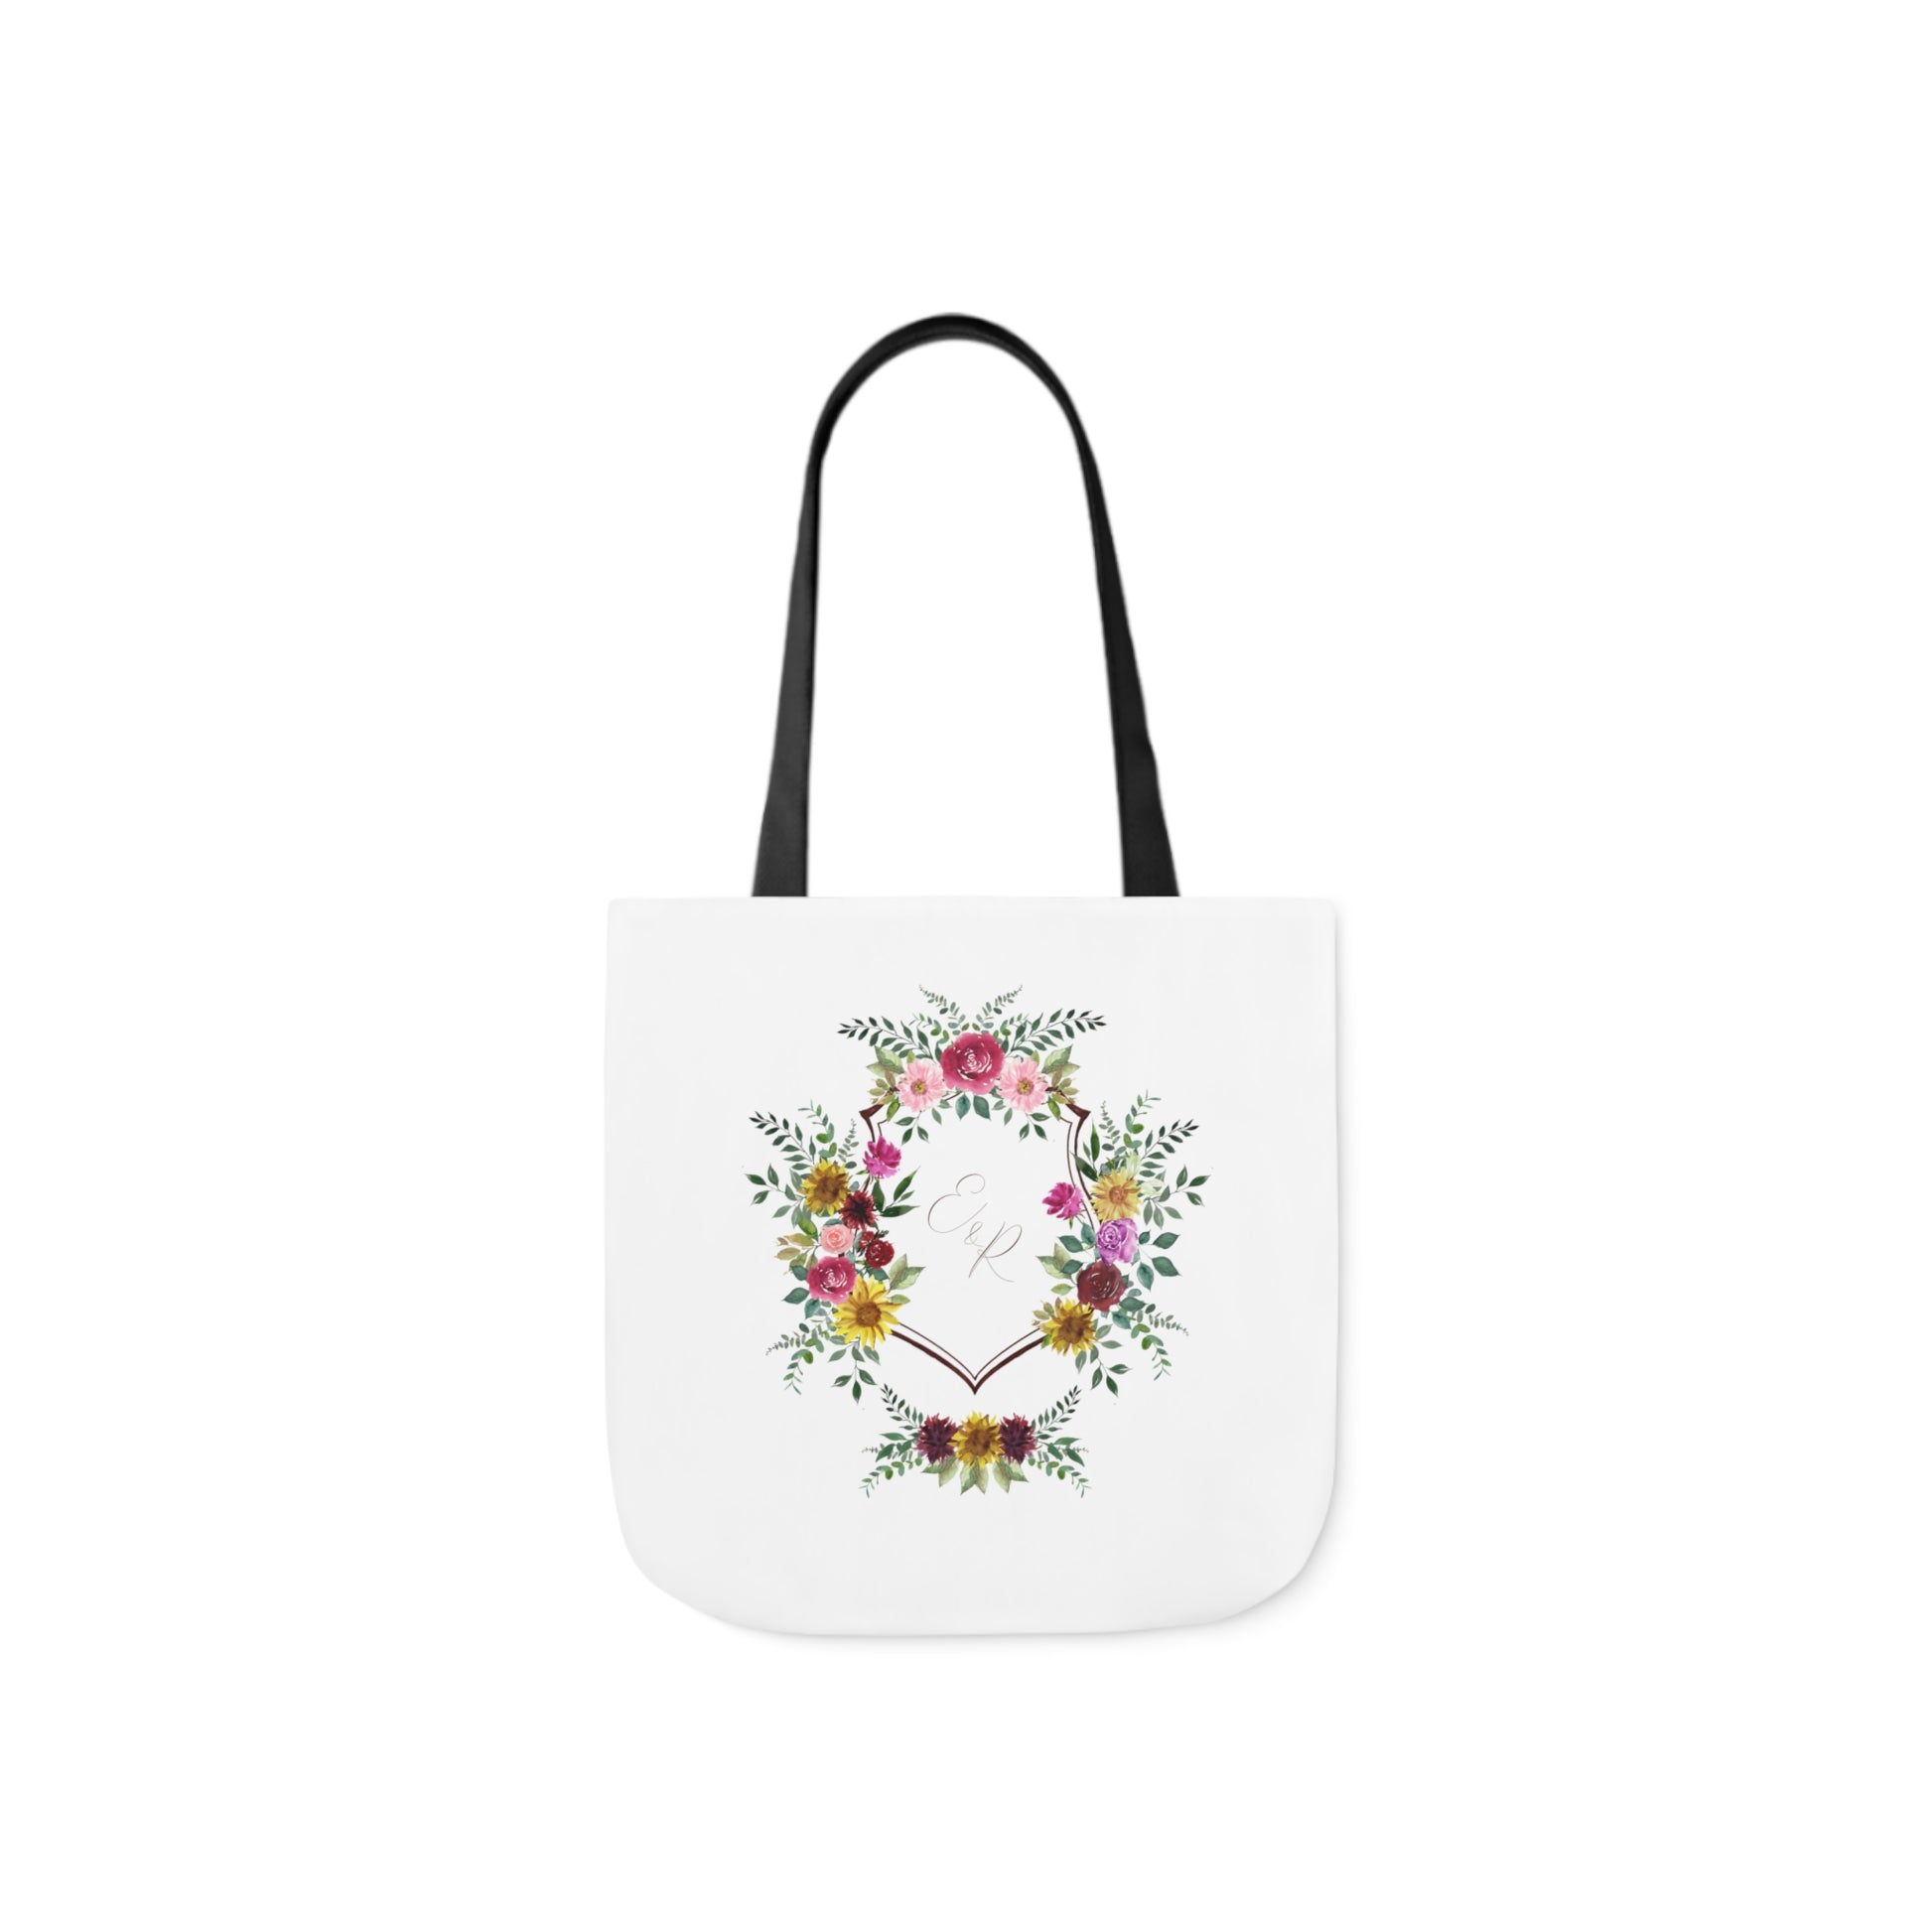 Print your crest: tote bag (crest not included) The Wedding Crest Lab